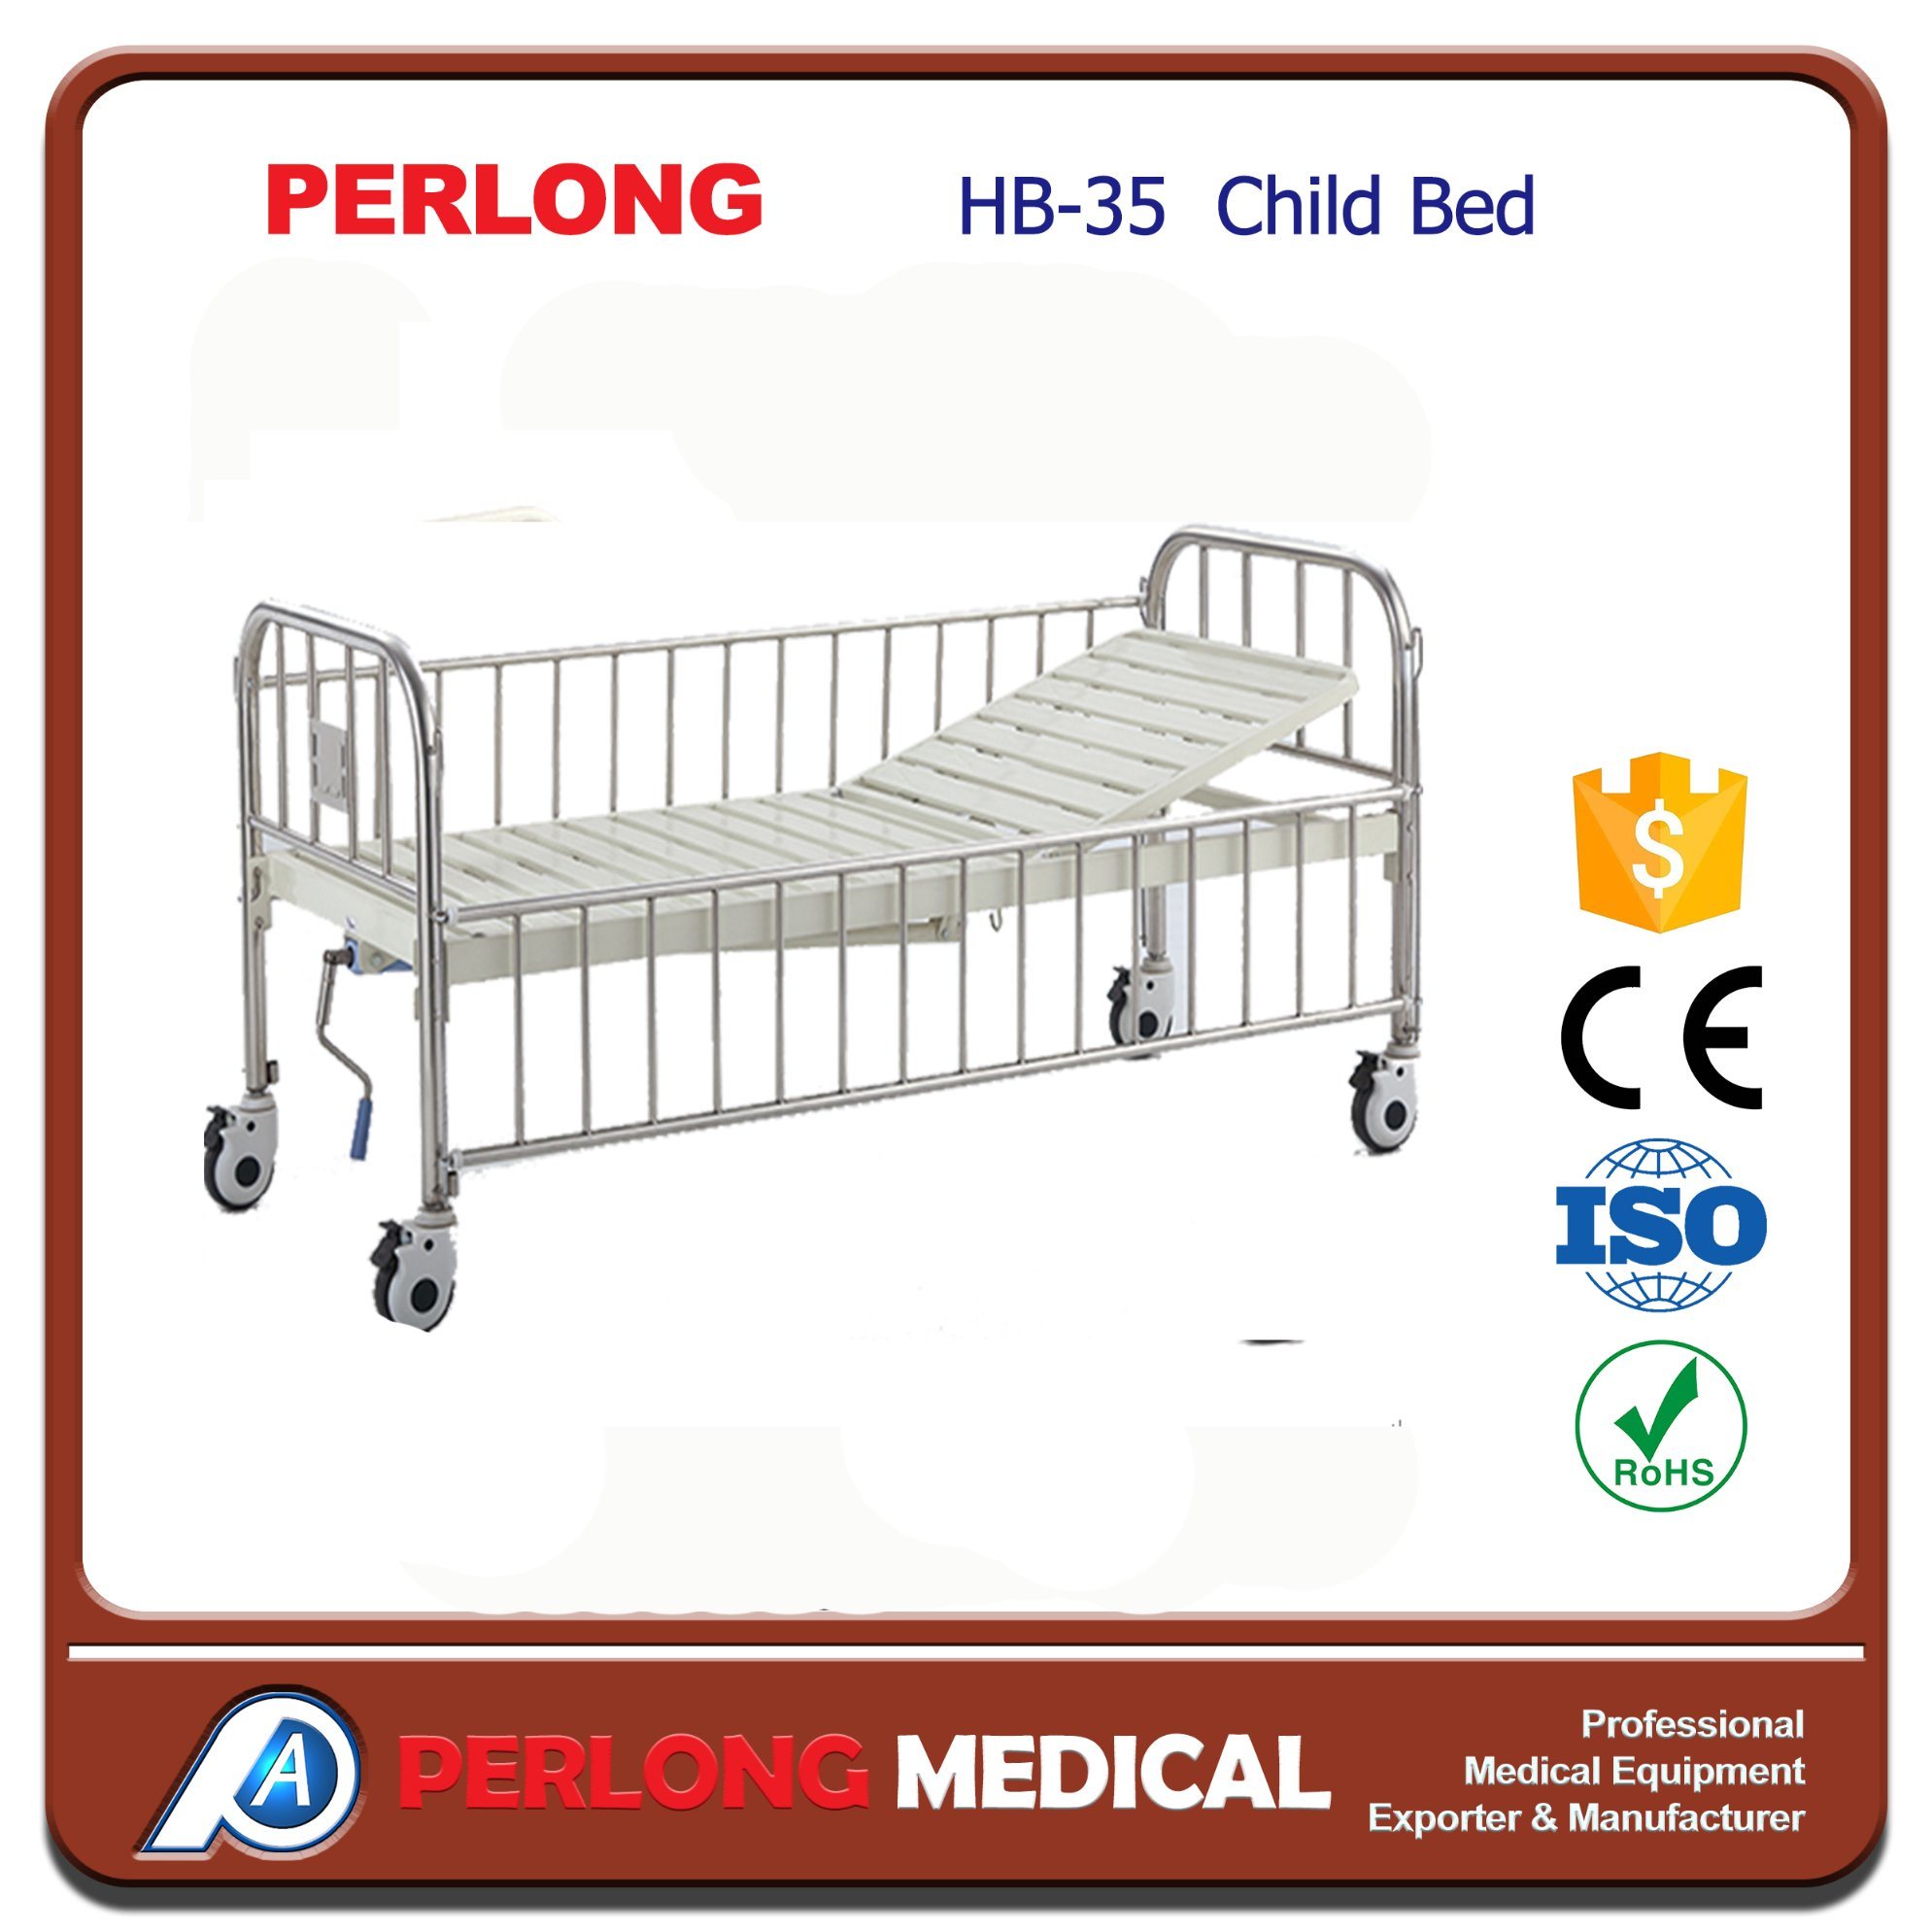 New Arrival Stainless Steel Child Bed Hb-35